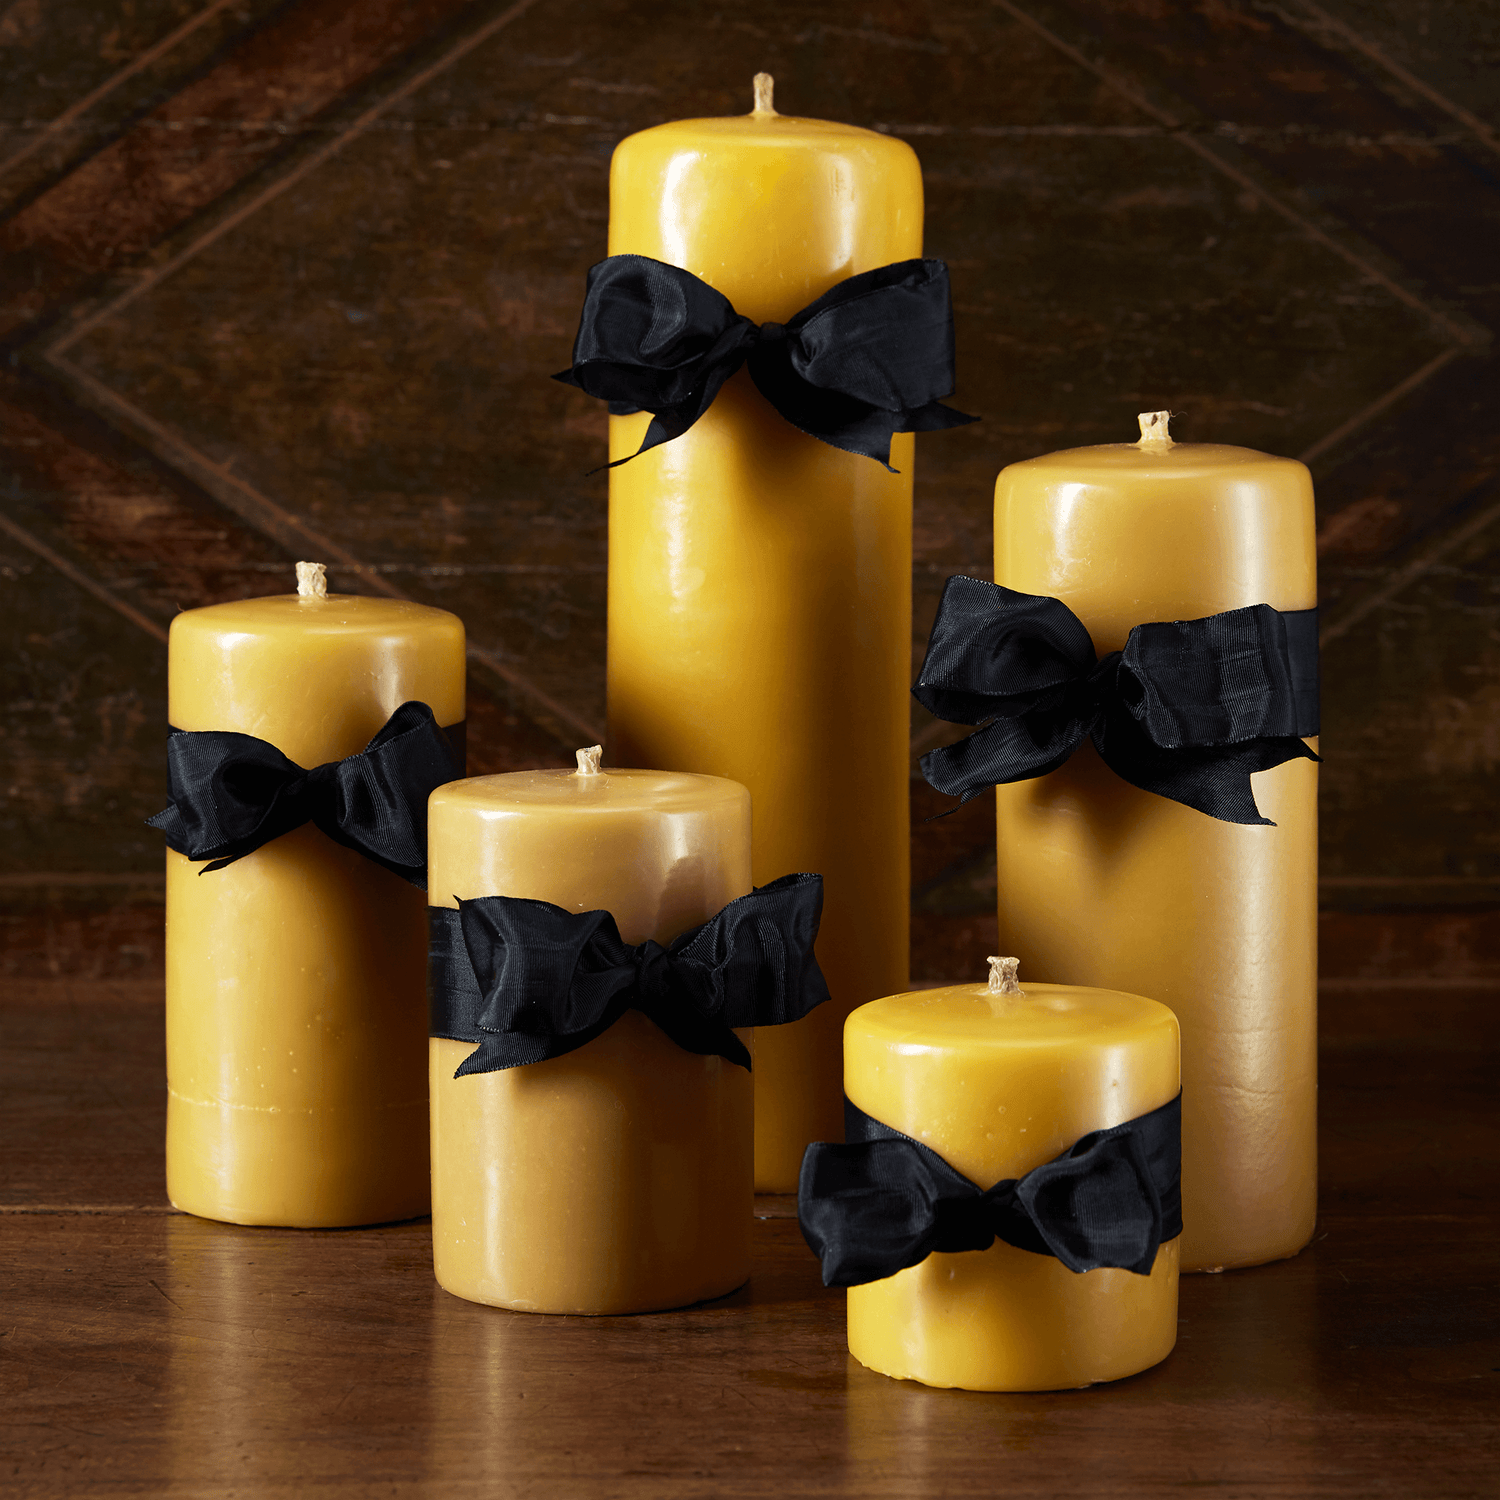 Candle Holders, Matches & Accessories For Beeswax Candles